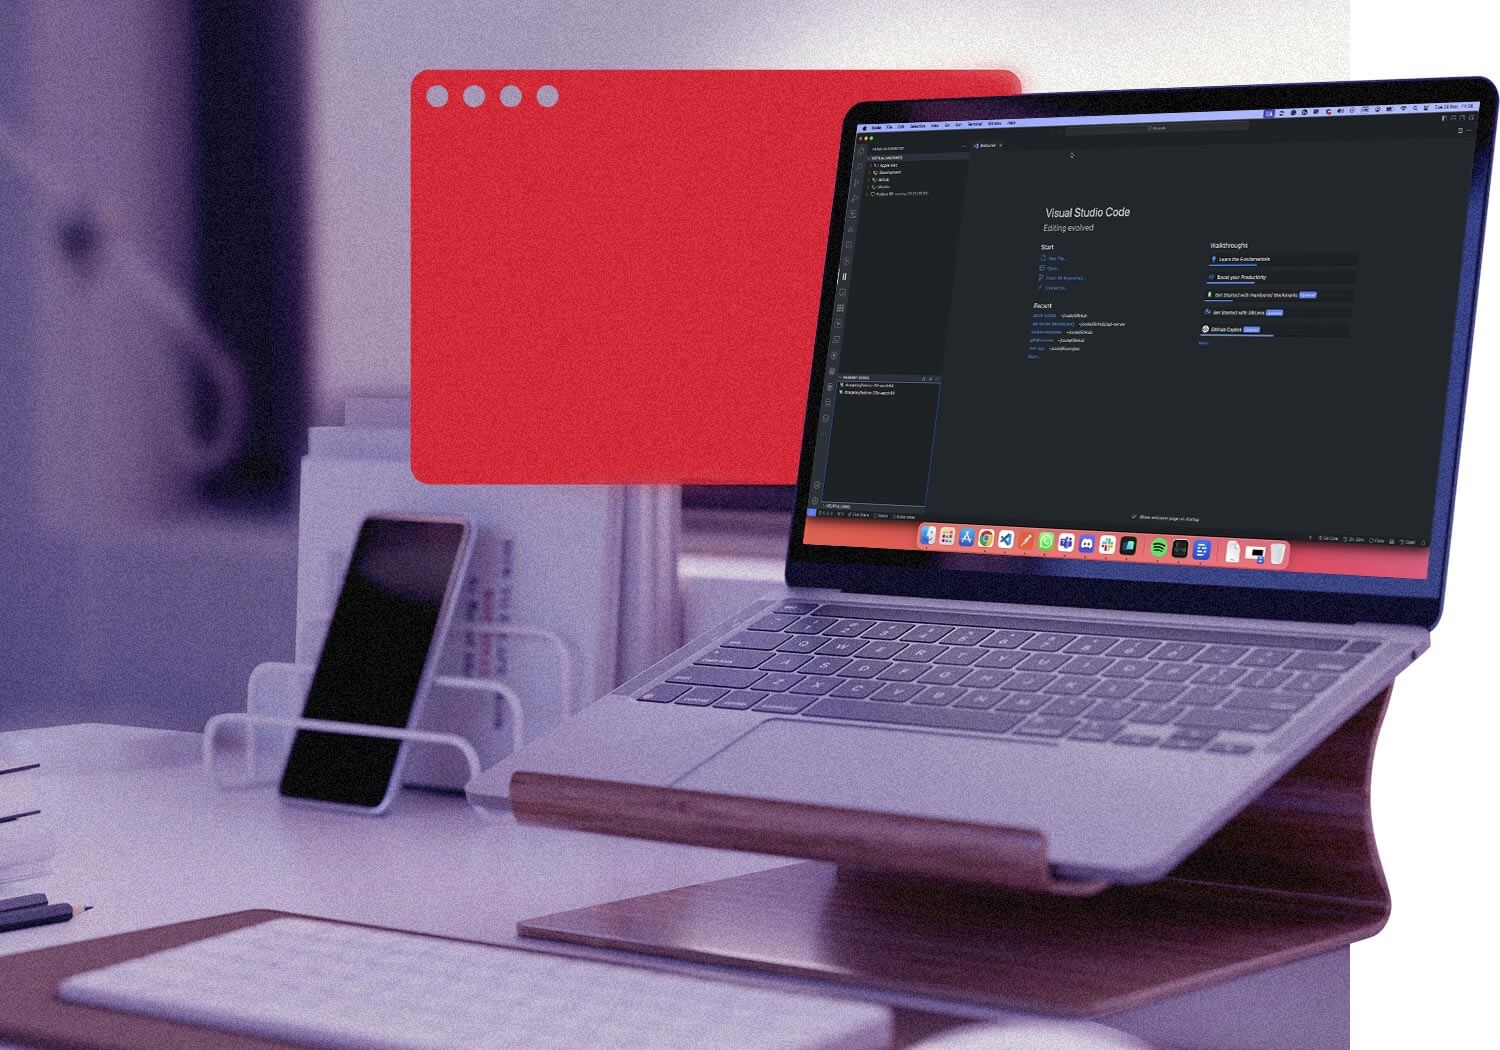 Use Vagrant with Parallels Desktop